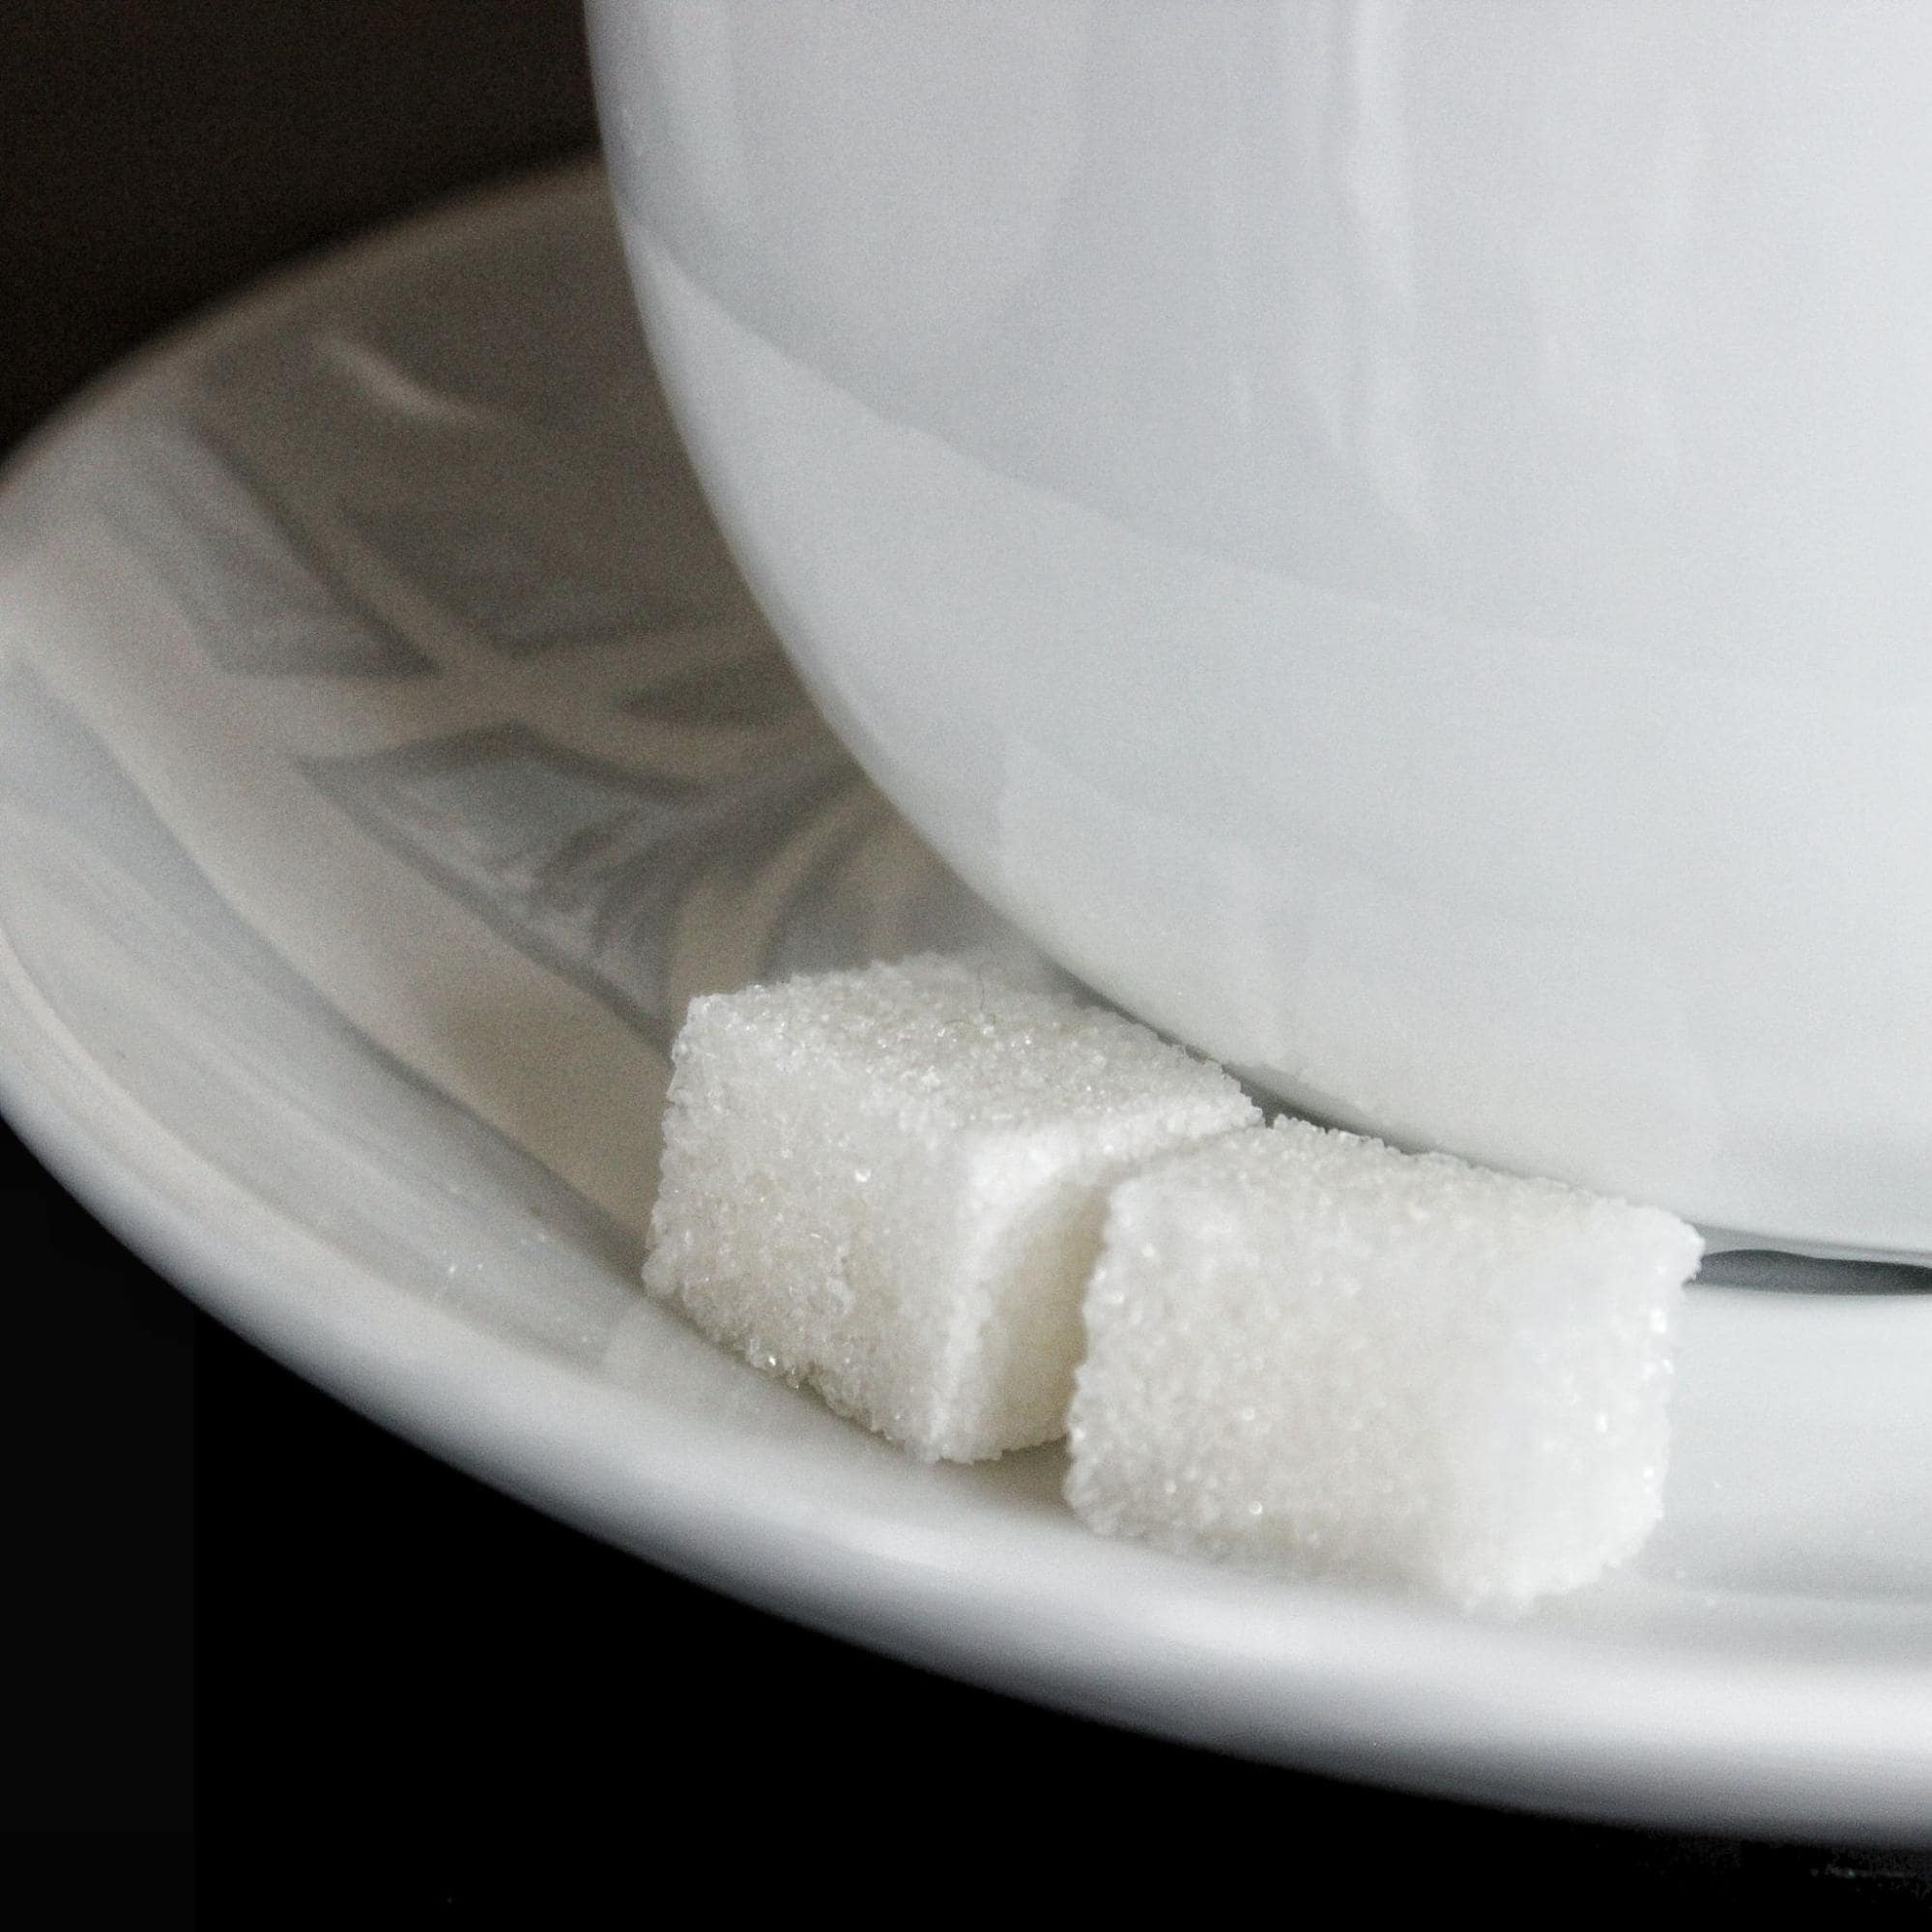 Picture of sugar cubes on tea plate